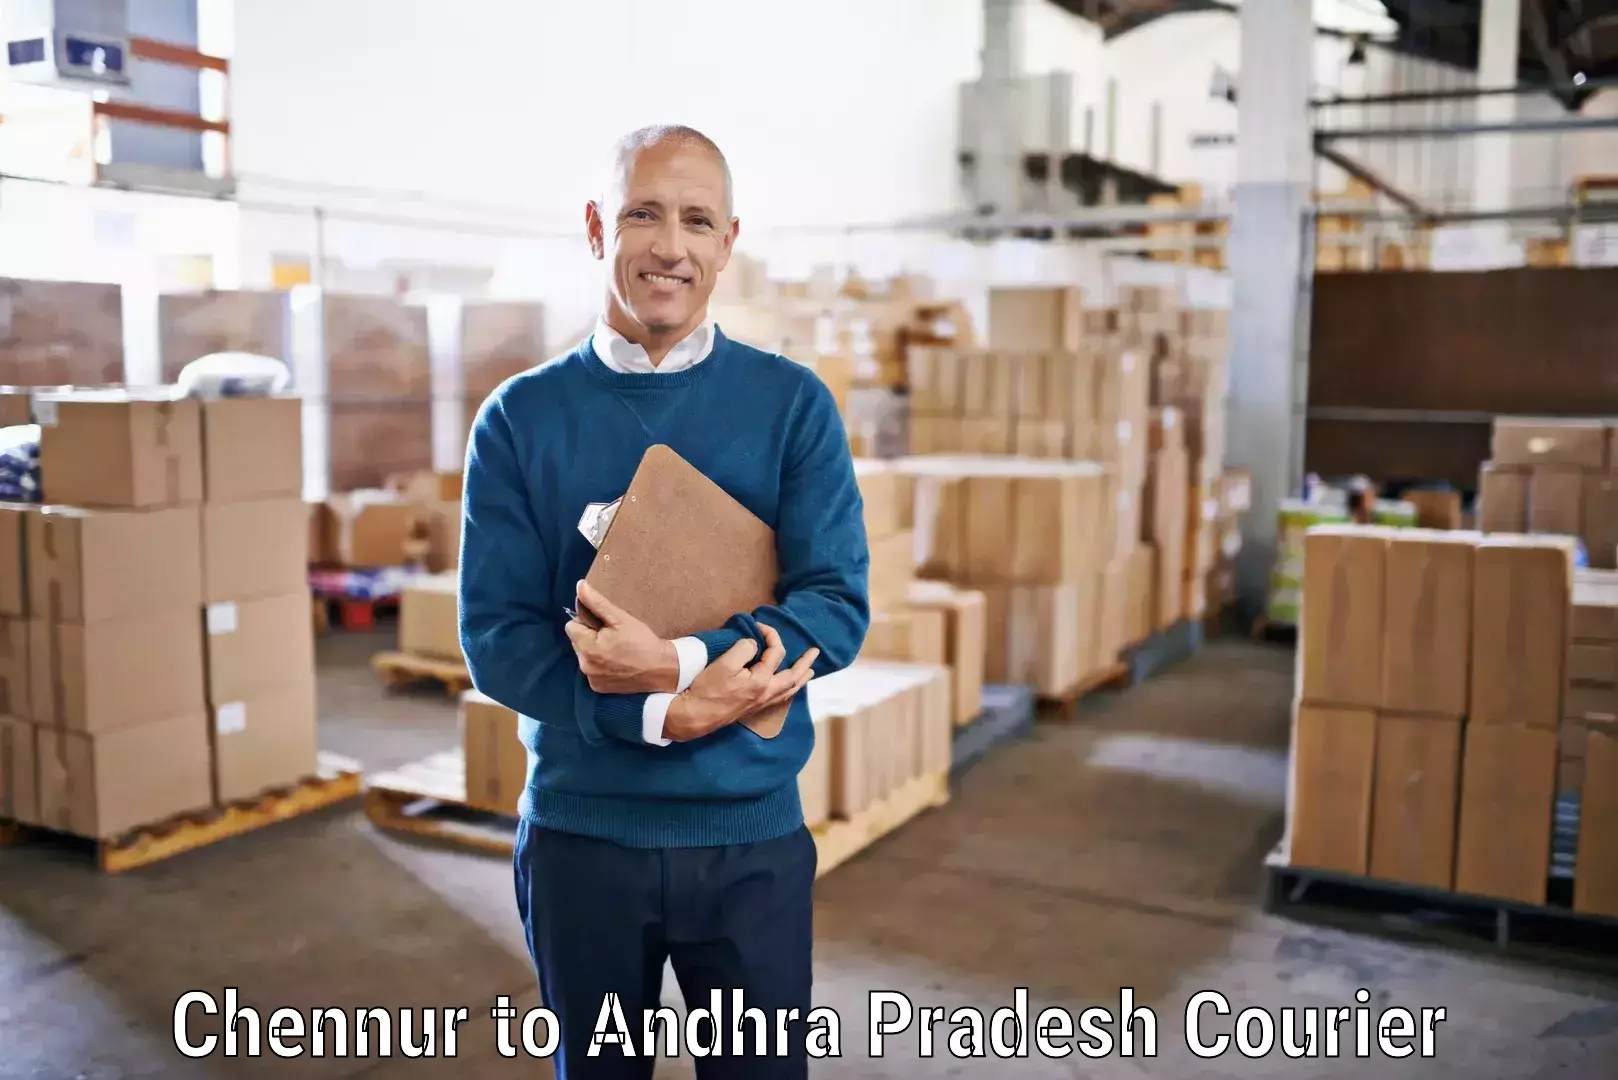 State-of-the-art courier technology Chennur to Visakhapatnam Port